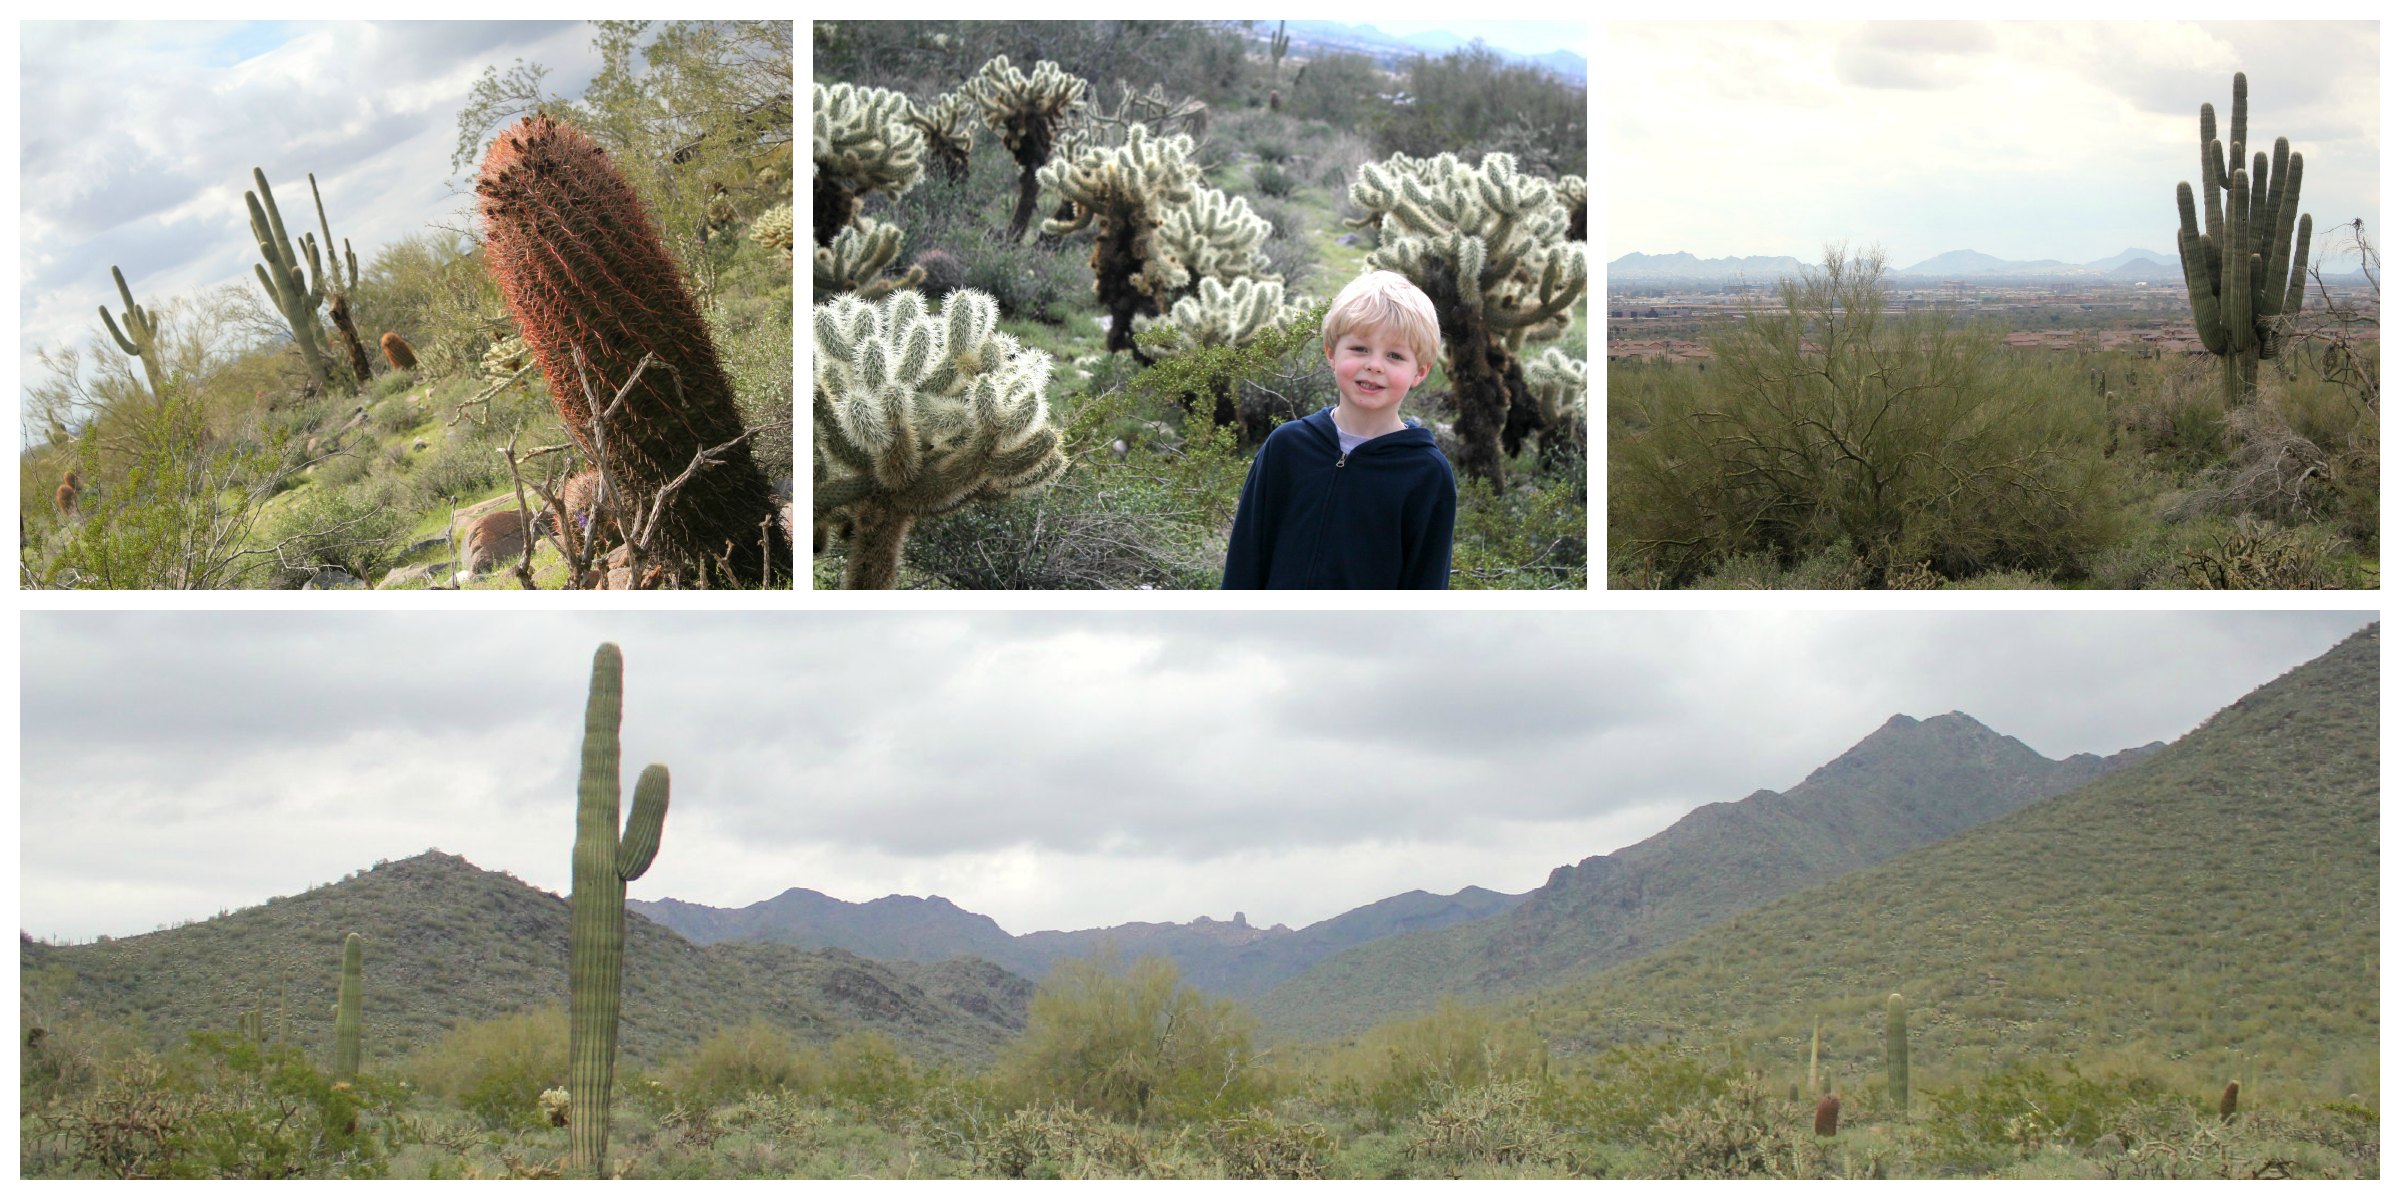 McDowell Mountains